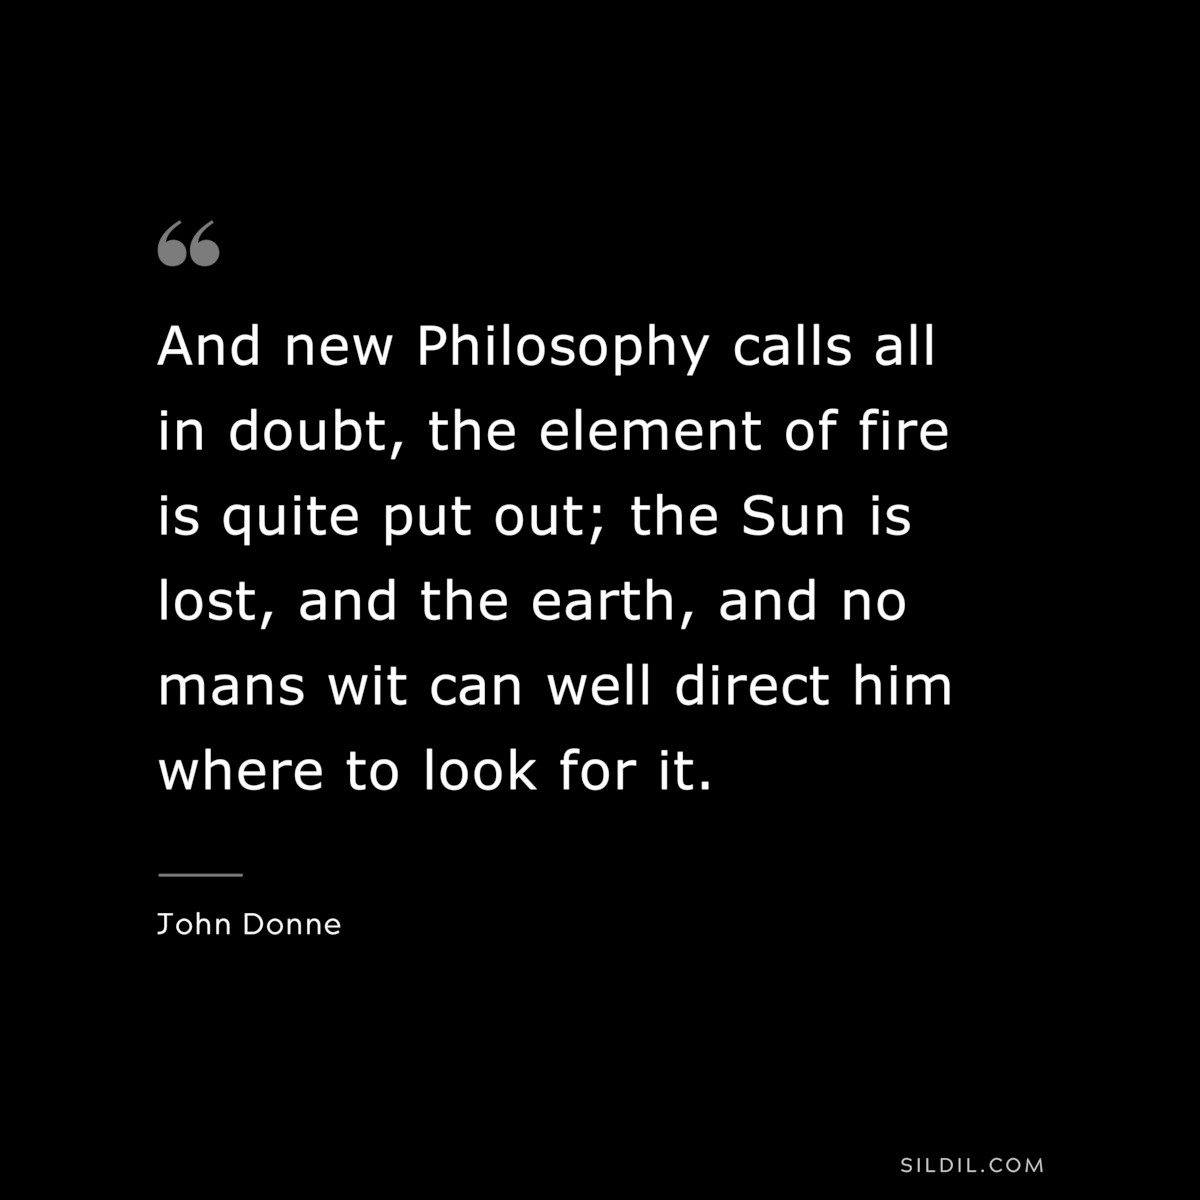 And new Philosophy calls all in doubt, the element of fire is quite put out; the Sun is lost, and the earth, and no mans wit can well direct him where to look for it. ― John Donne